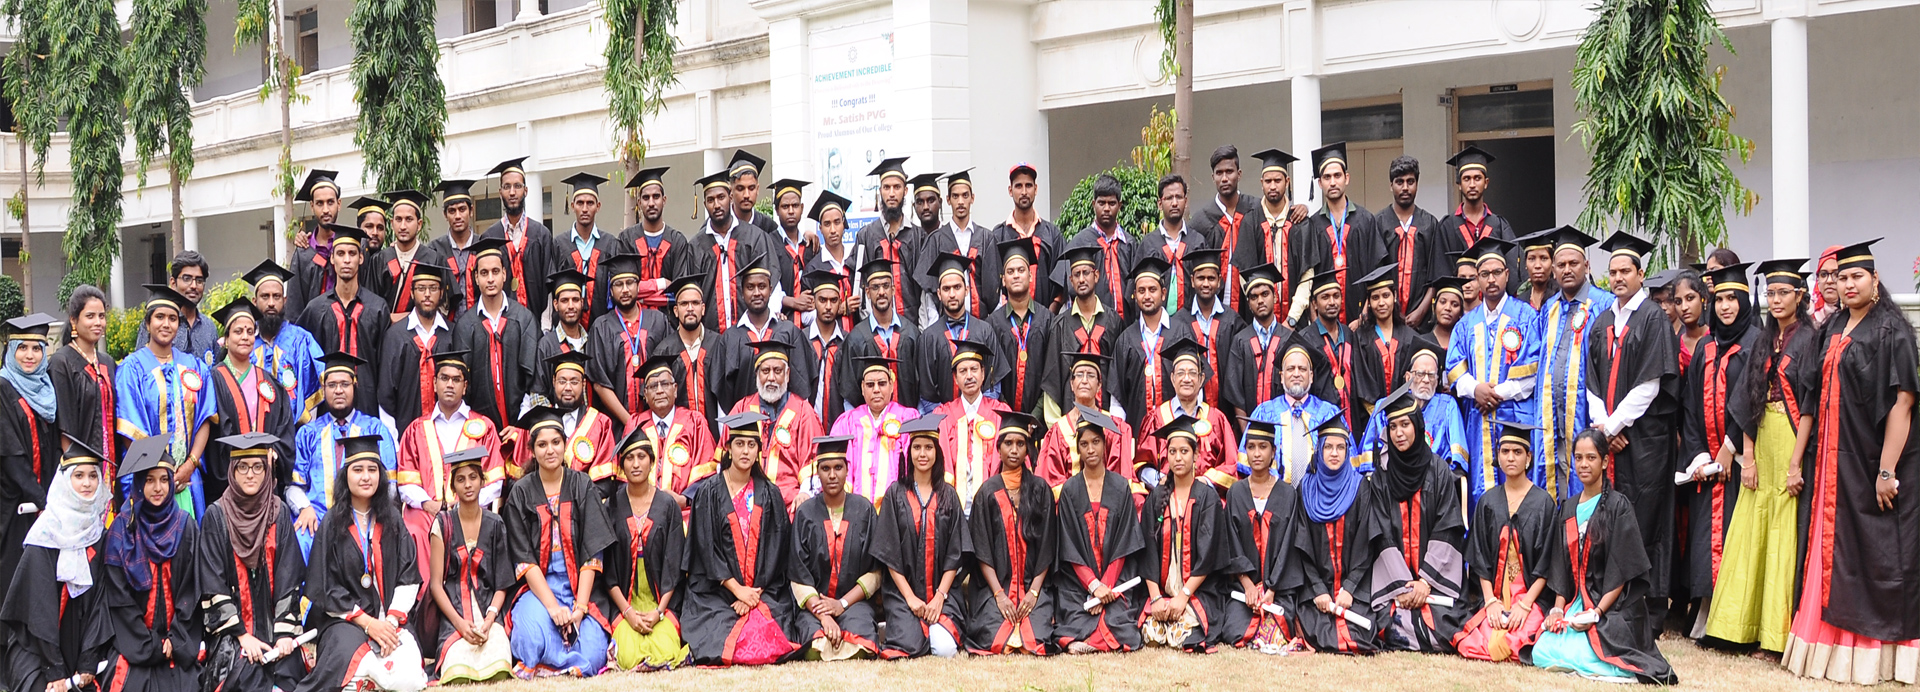 Global Institute of Engineering and Technology, Hyderabad Image